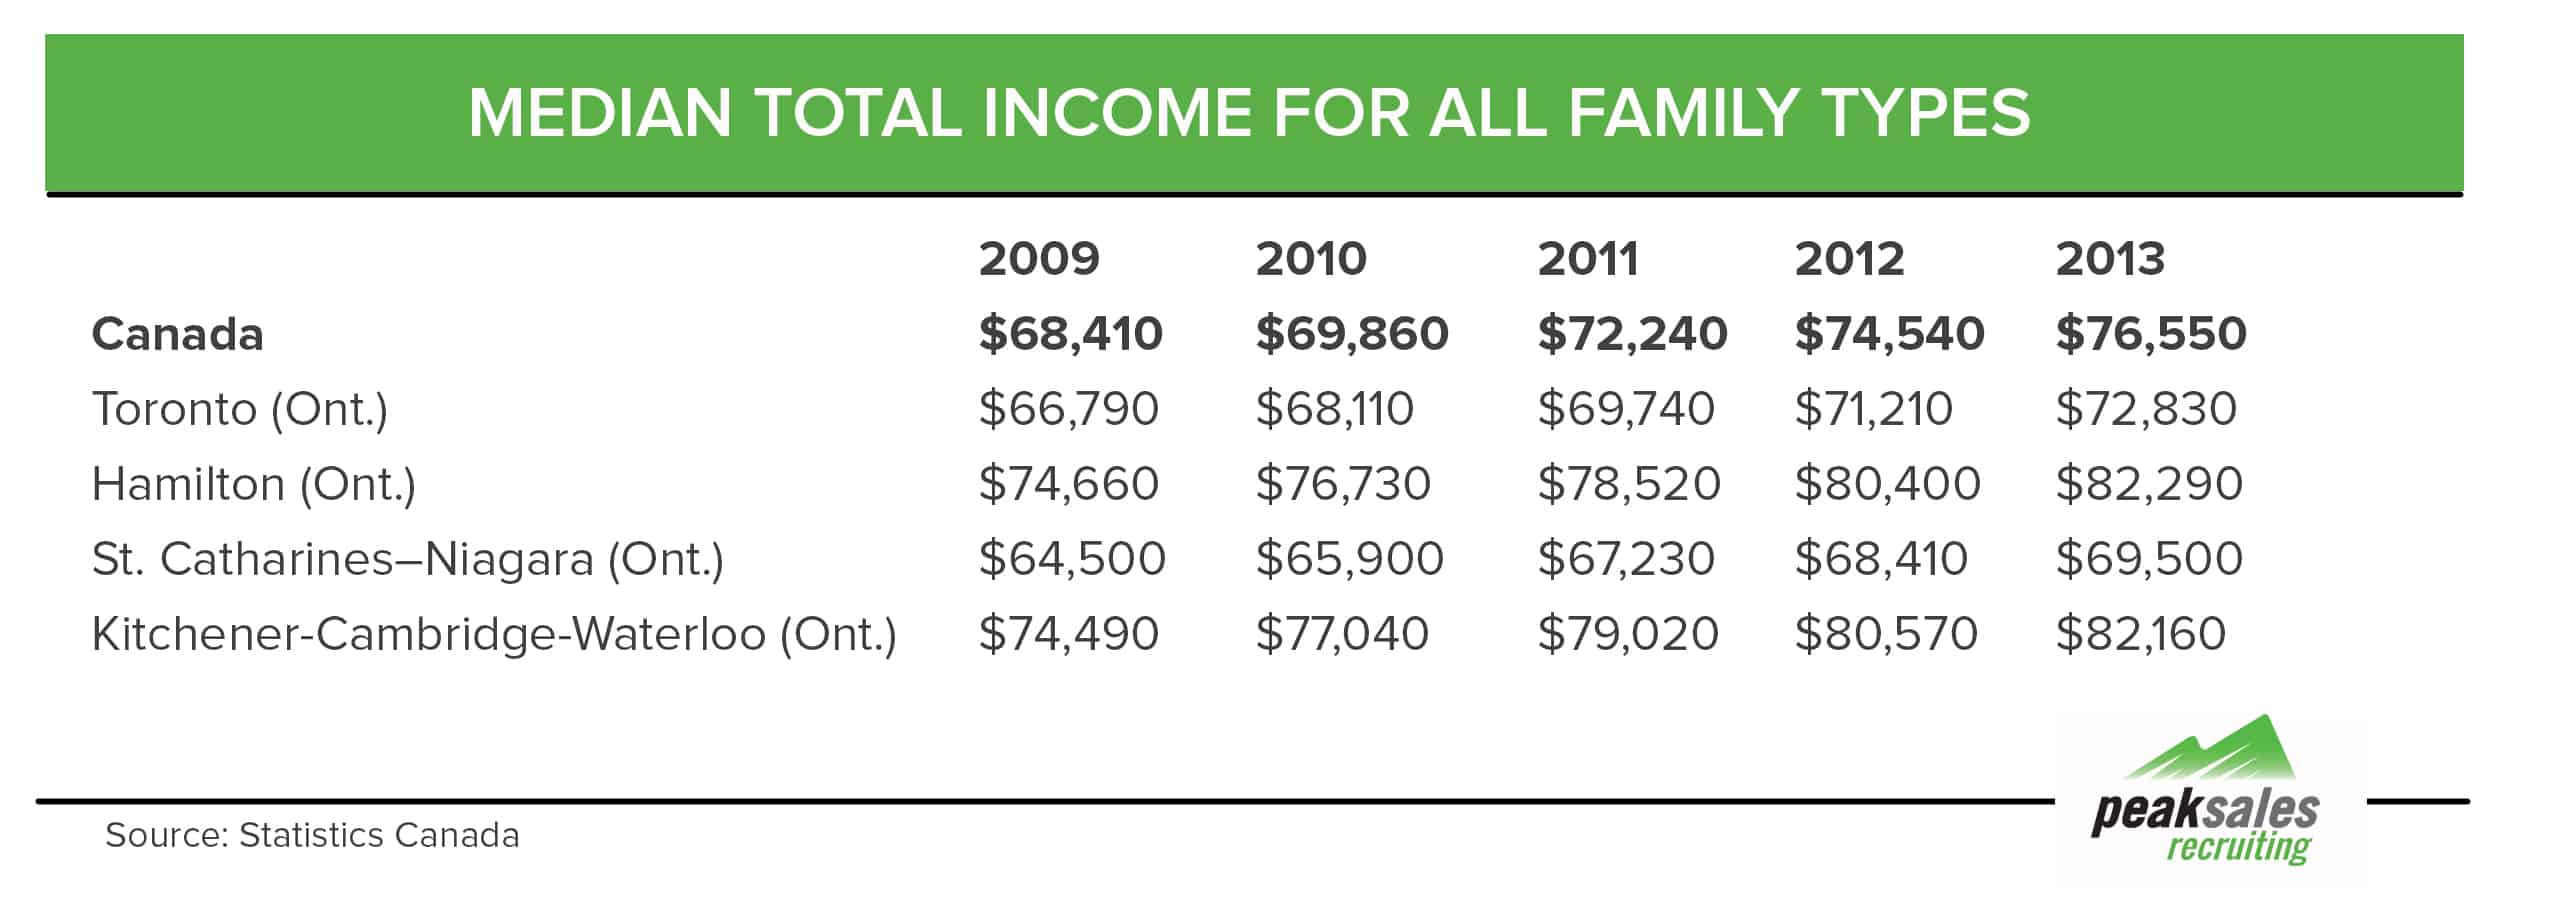 Median total income for family types